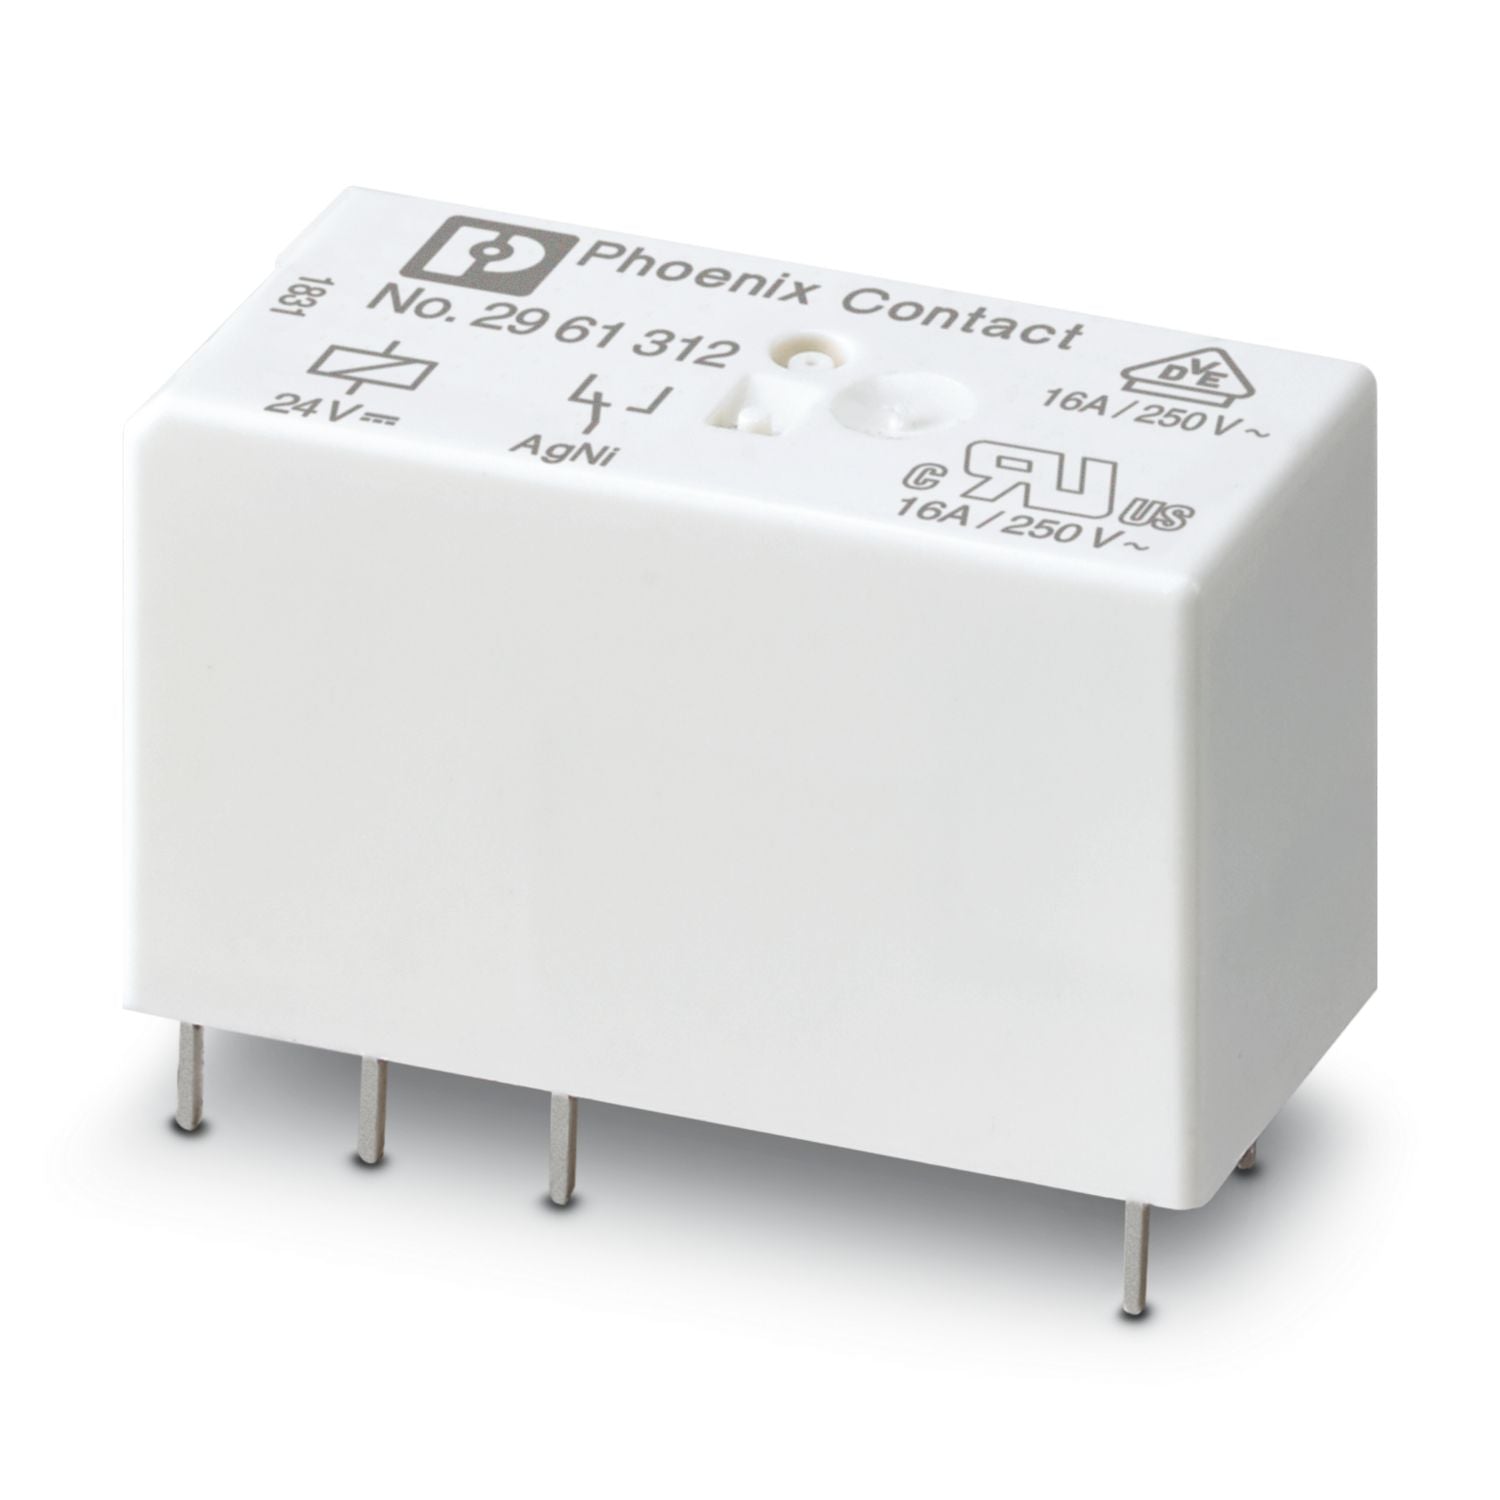 2961312 | Phoenix Contact Power Relays, Plug-in Miniature, Power Contact, High Current, In 24VDC, 1 PDT